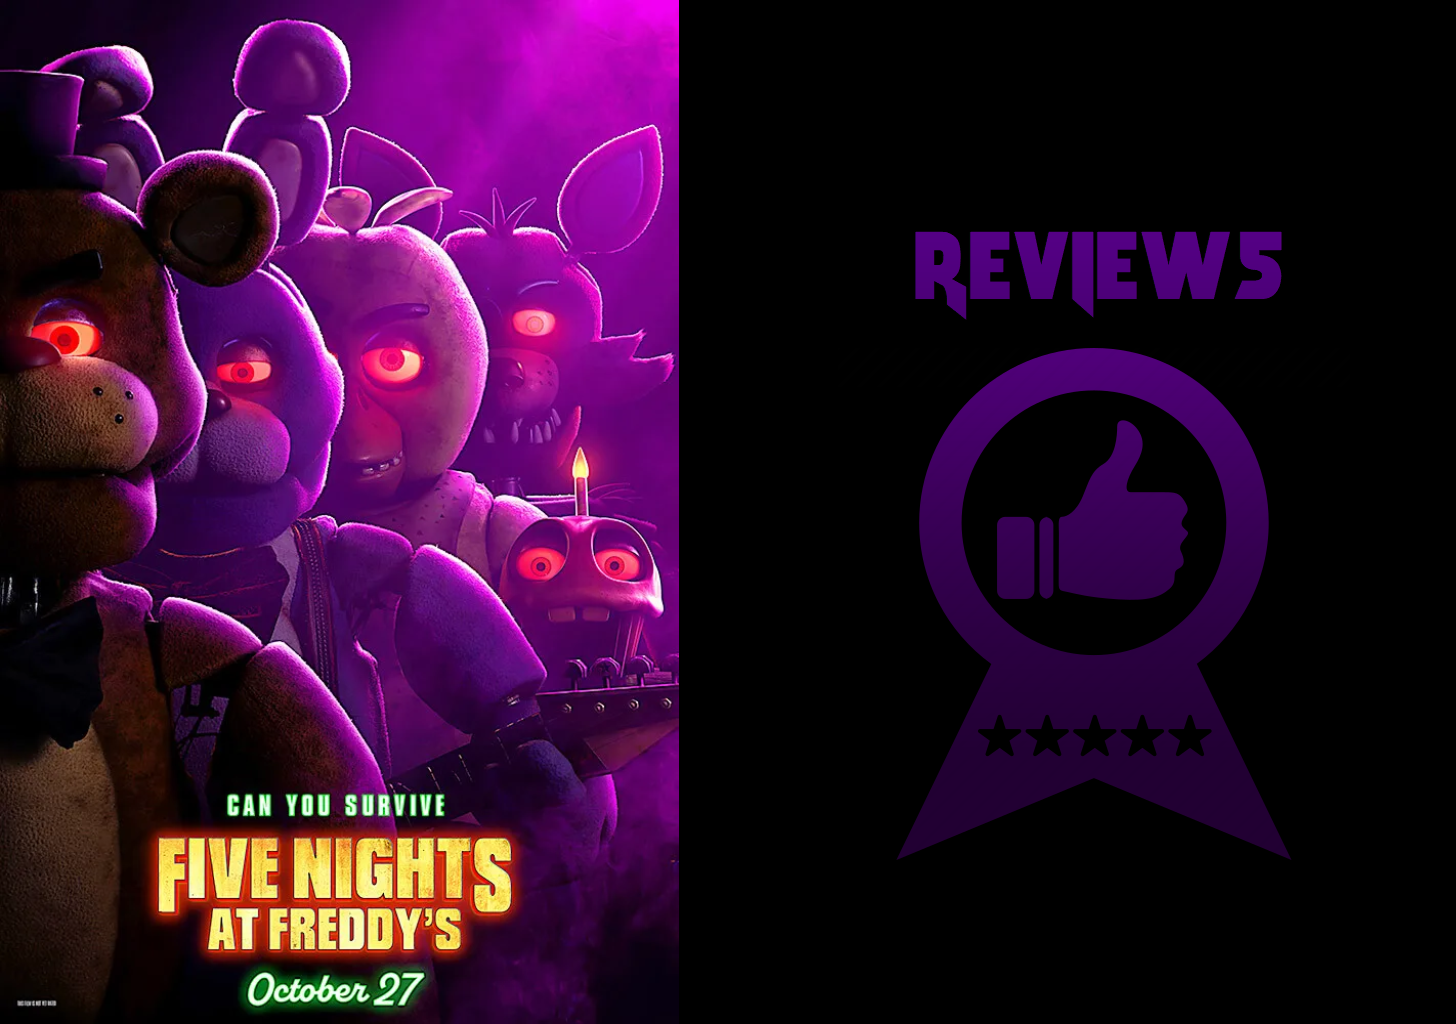 FNAF Movie Reviews: Critics Share Mixed First Reactions